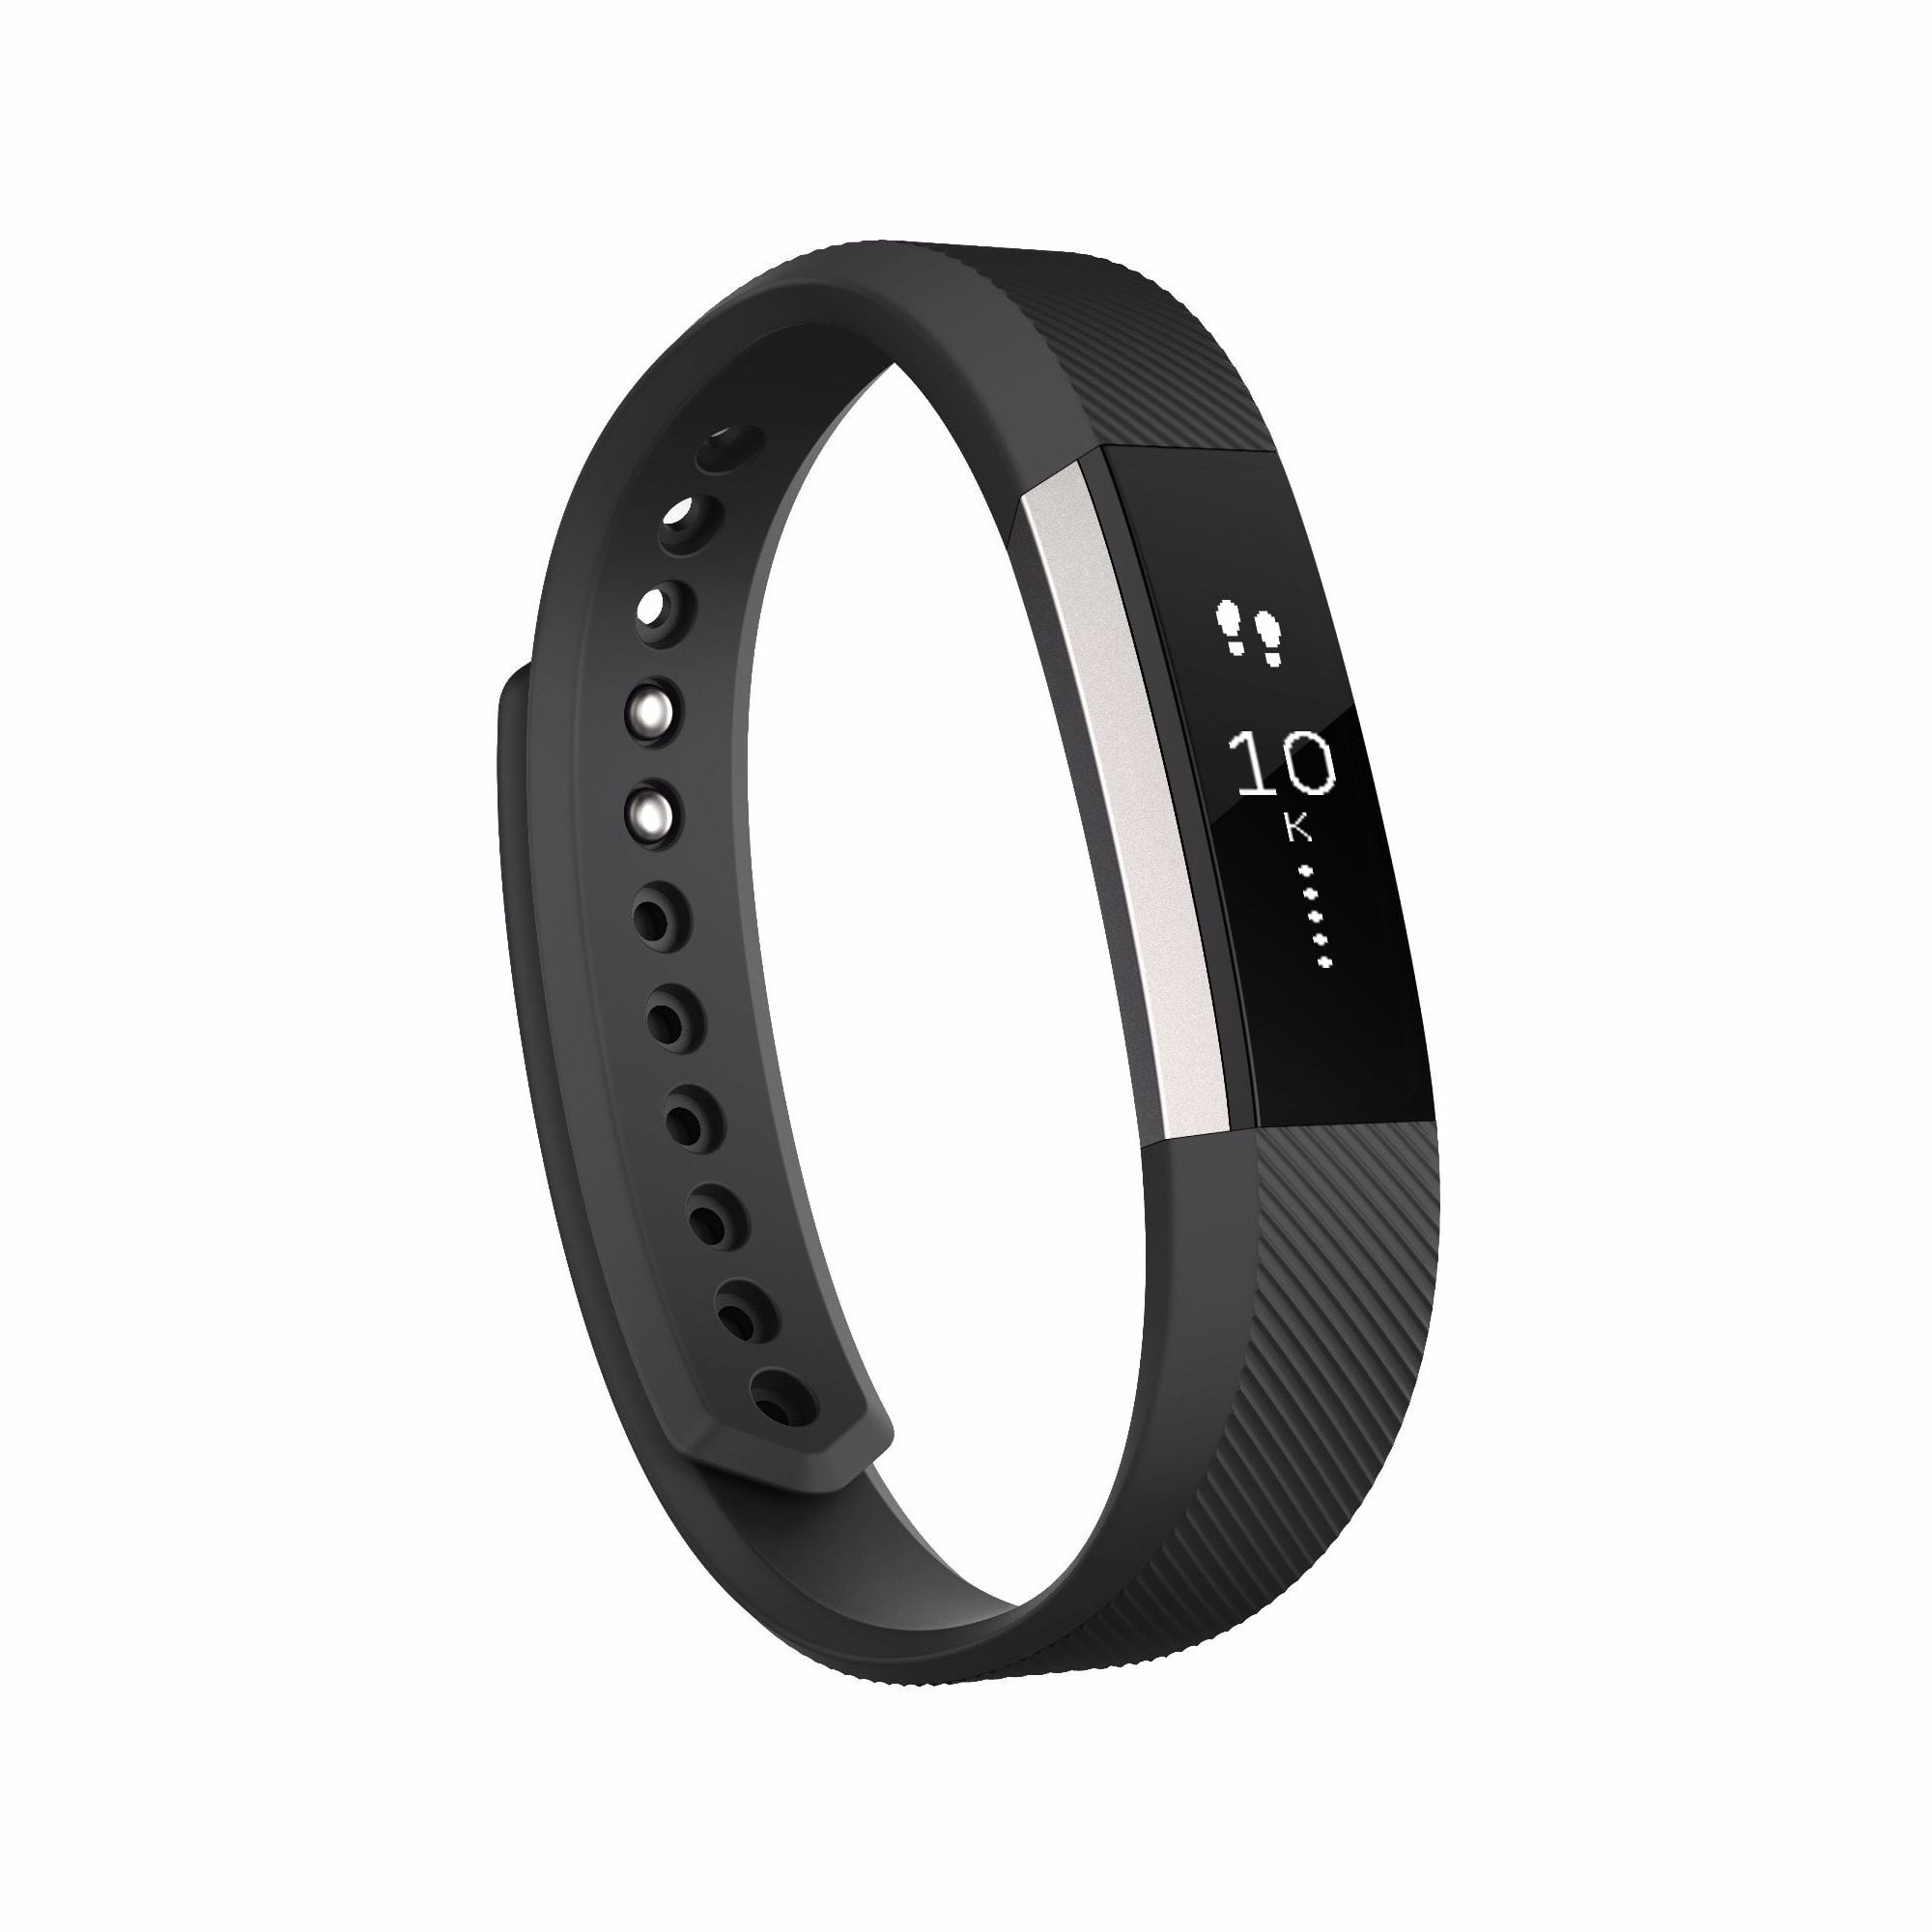 Black for sale online Fitbit One Wristband Activity and Sleep Tracker 